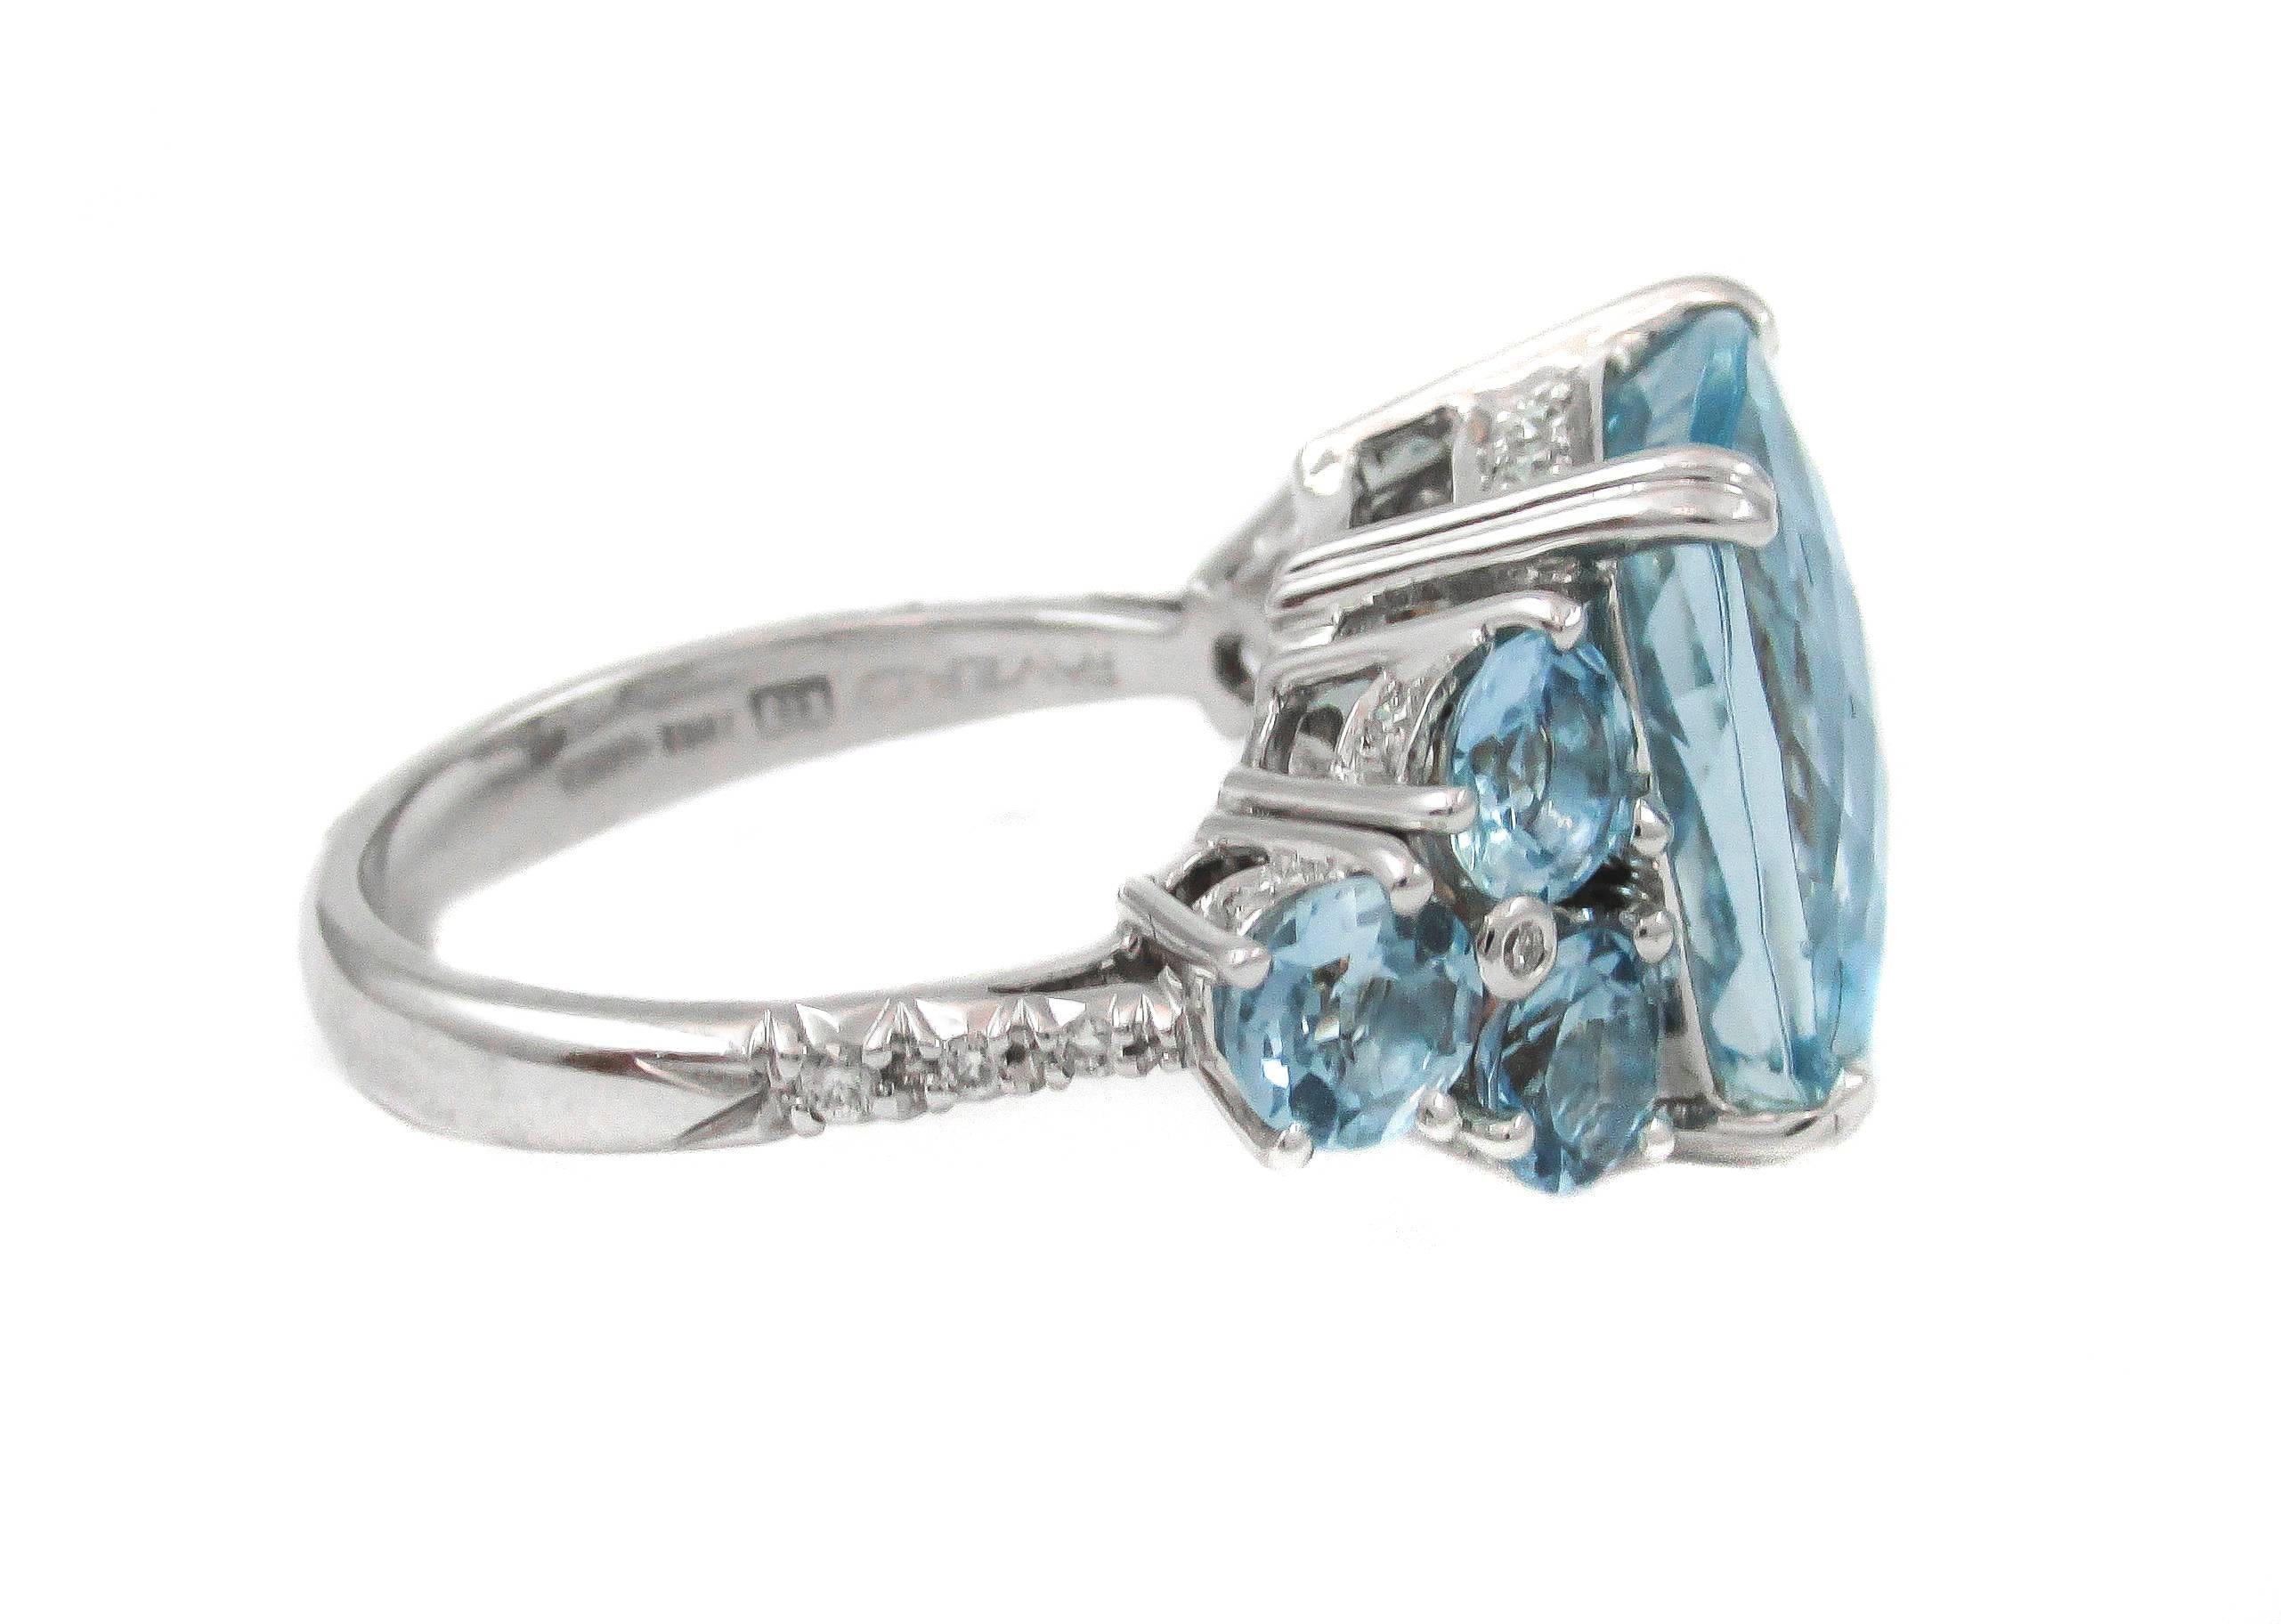 Exceptional 18 karat white gold diamond and aquamarine ring by Italian designer Mariano Favero. In the 1970s Favero started manufacturing stylish, wearable and well-crafted jewelry and soon thereafter became well known for his understanding of